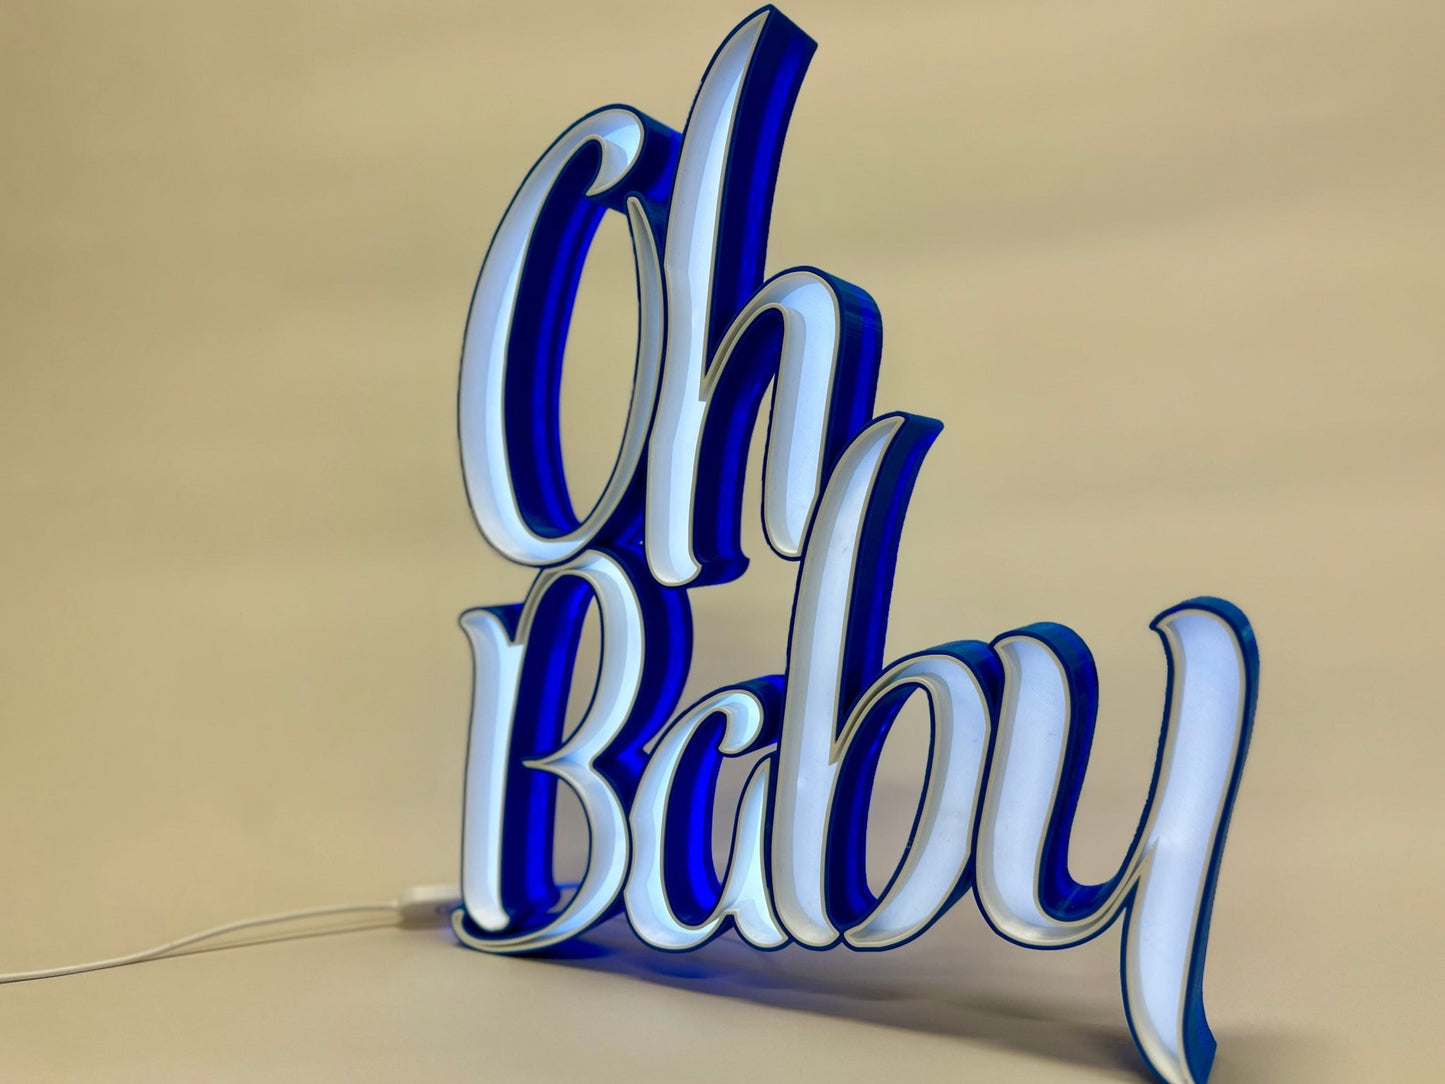 Oh Baby LED Light Sign – Whimsical Nursery and Event Decor - RudeGrain3d Printed led Lit Sign